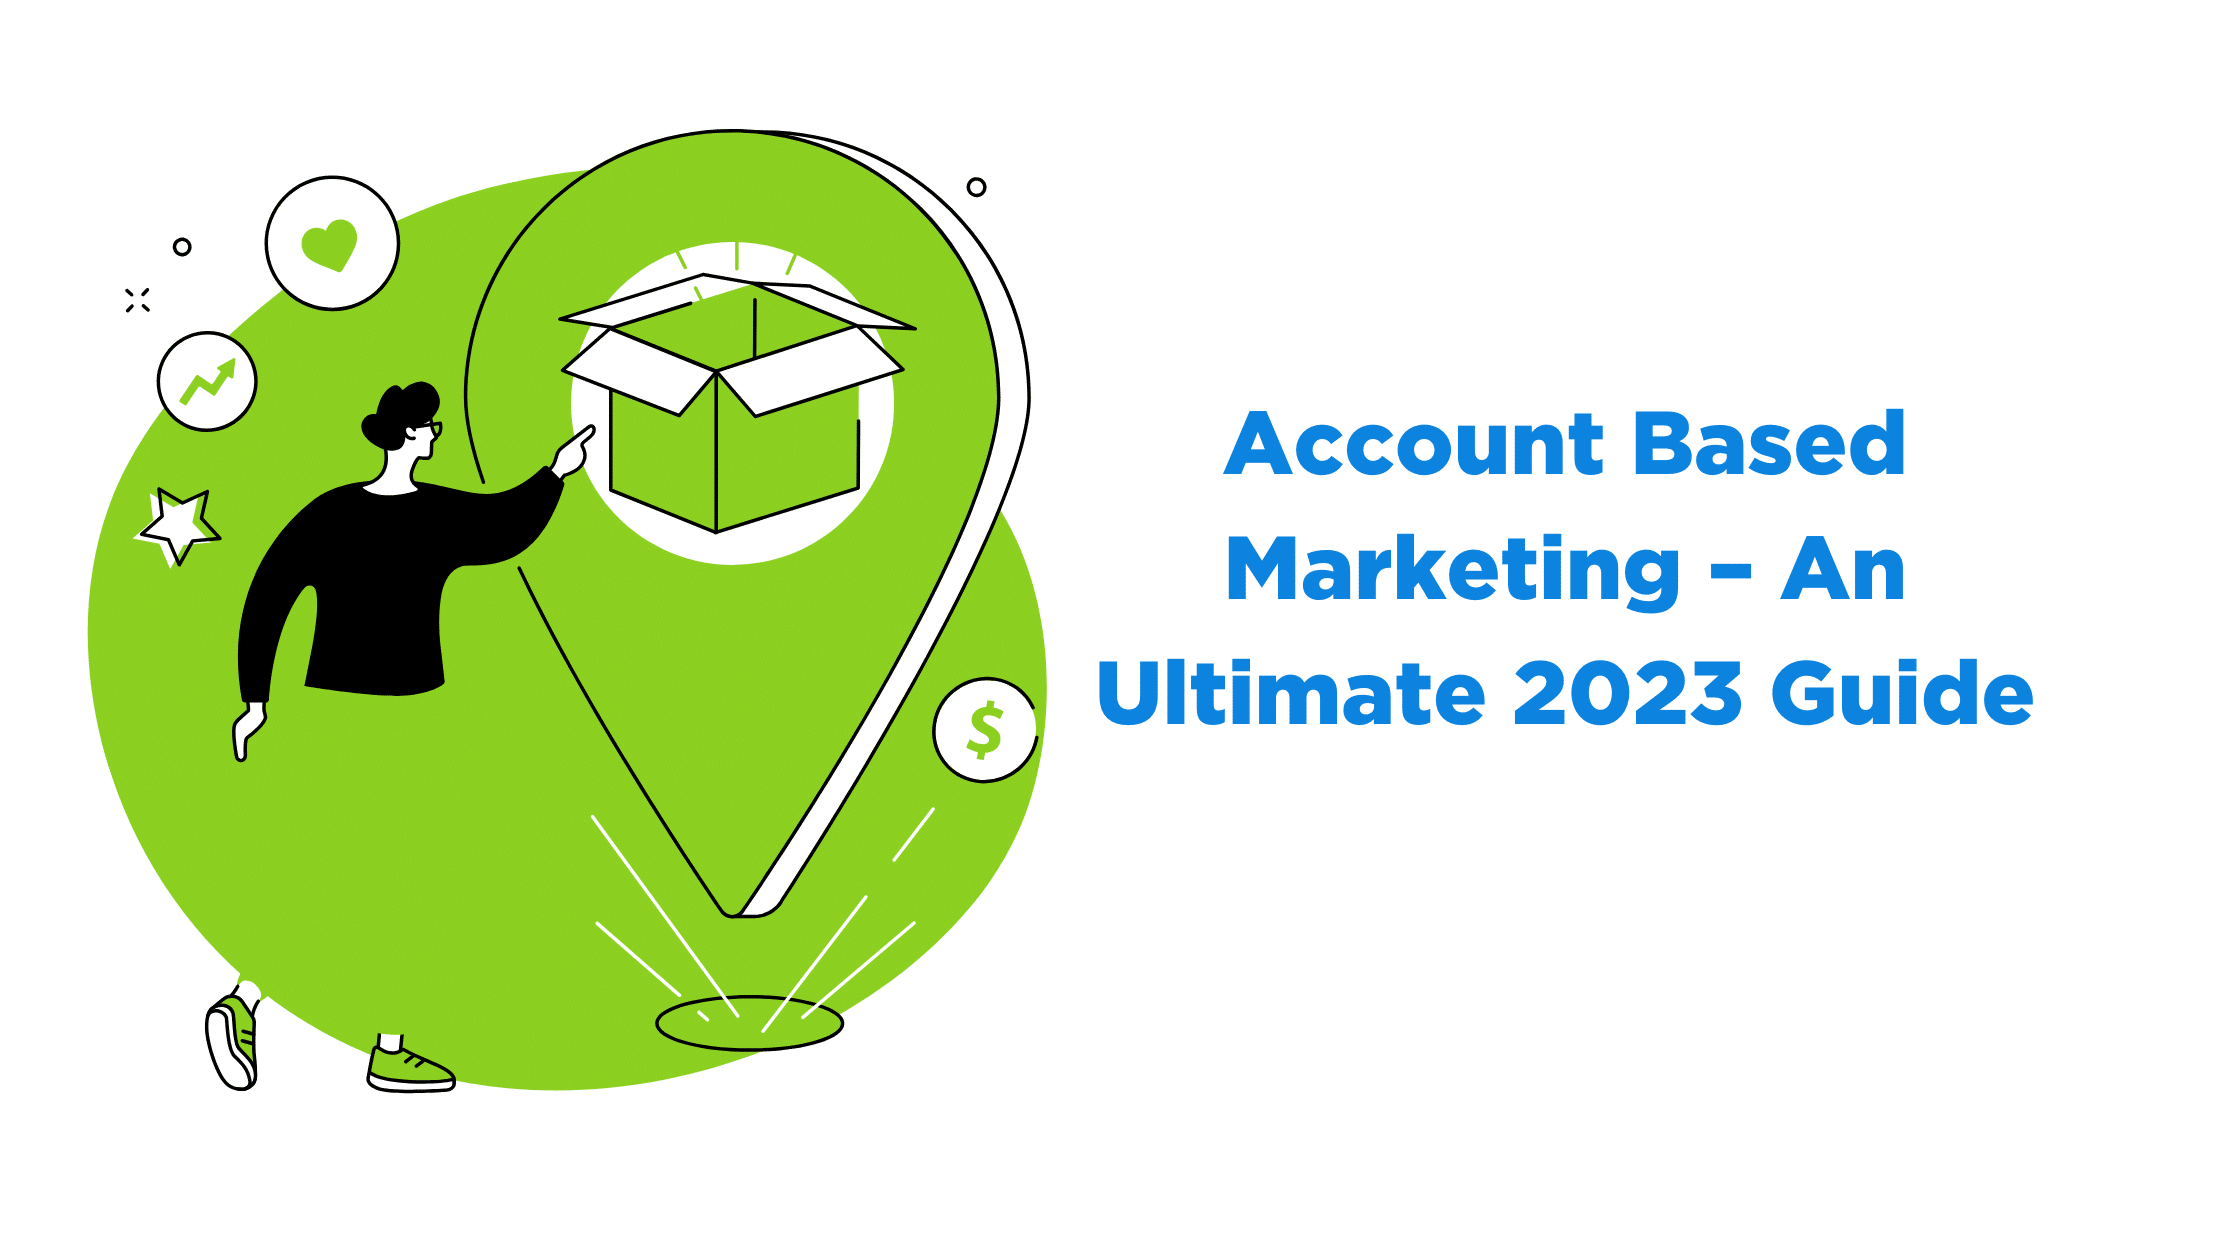 Account Based Marketing – An Ultimate 2023 Guide